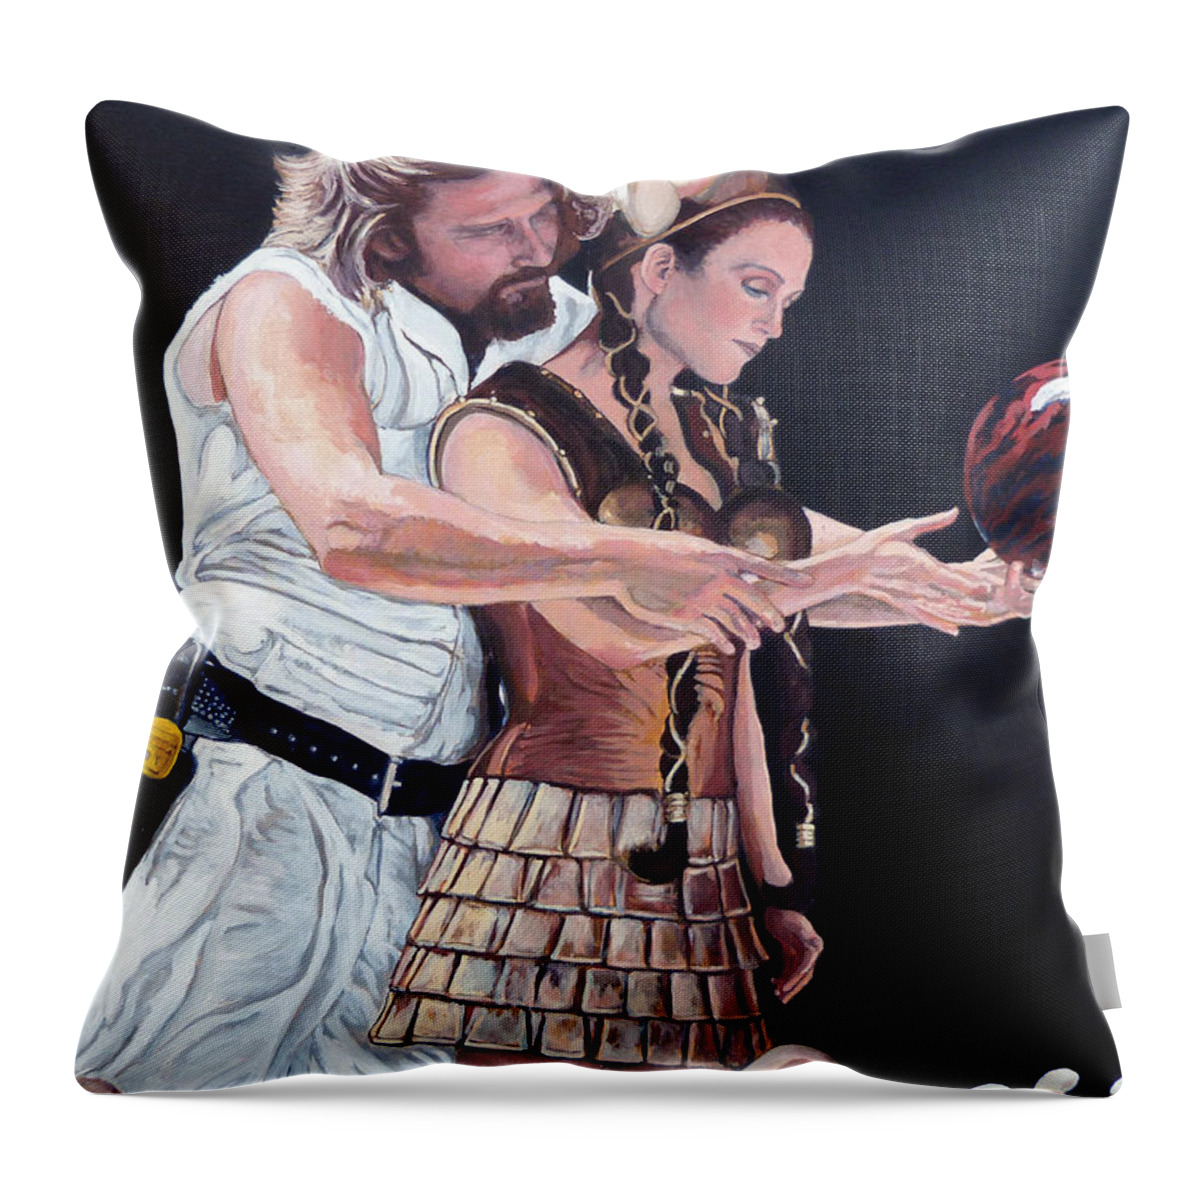 The Dude Throw Pillow featuring the painting I Just Dropped In by Tom Roderick